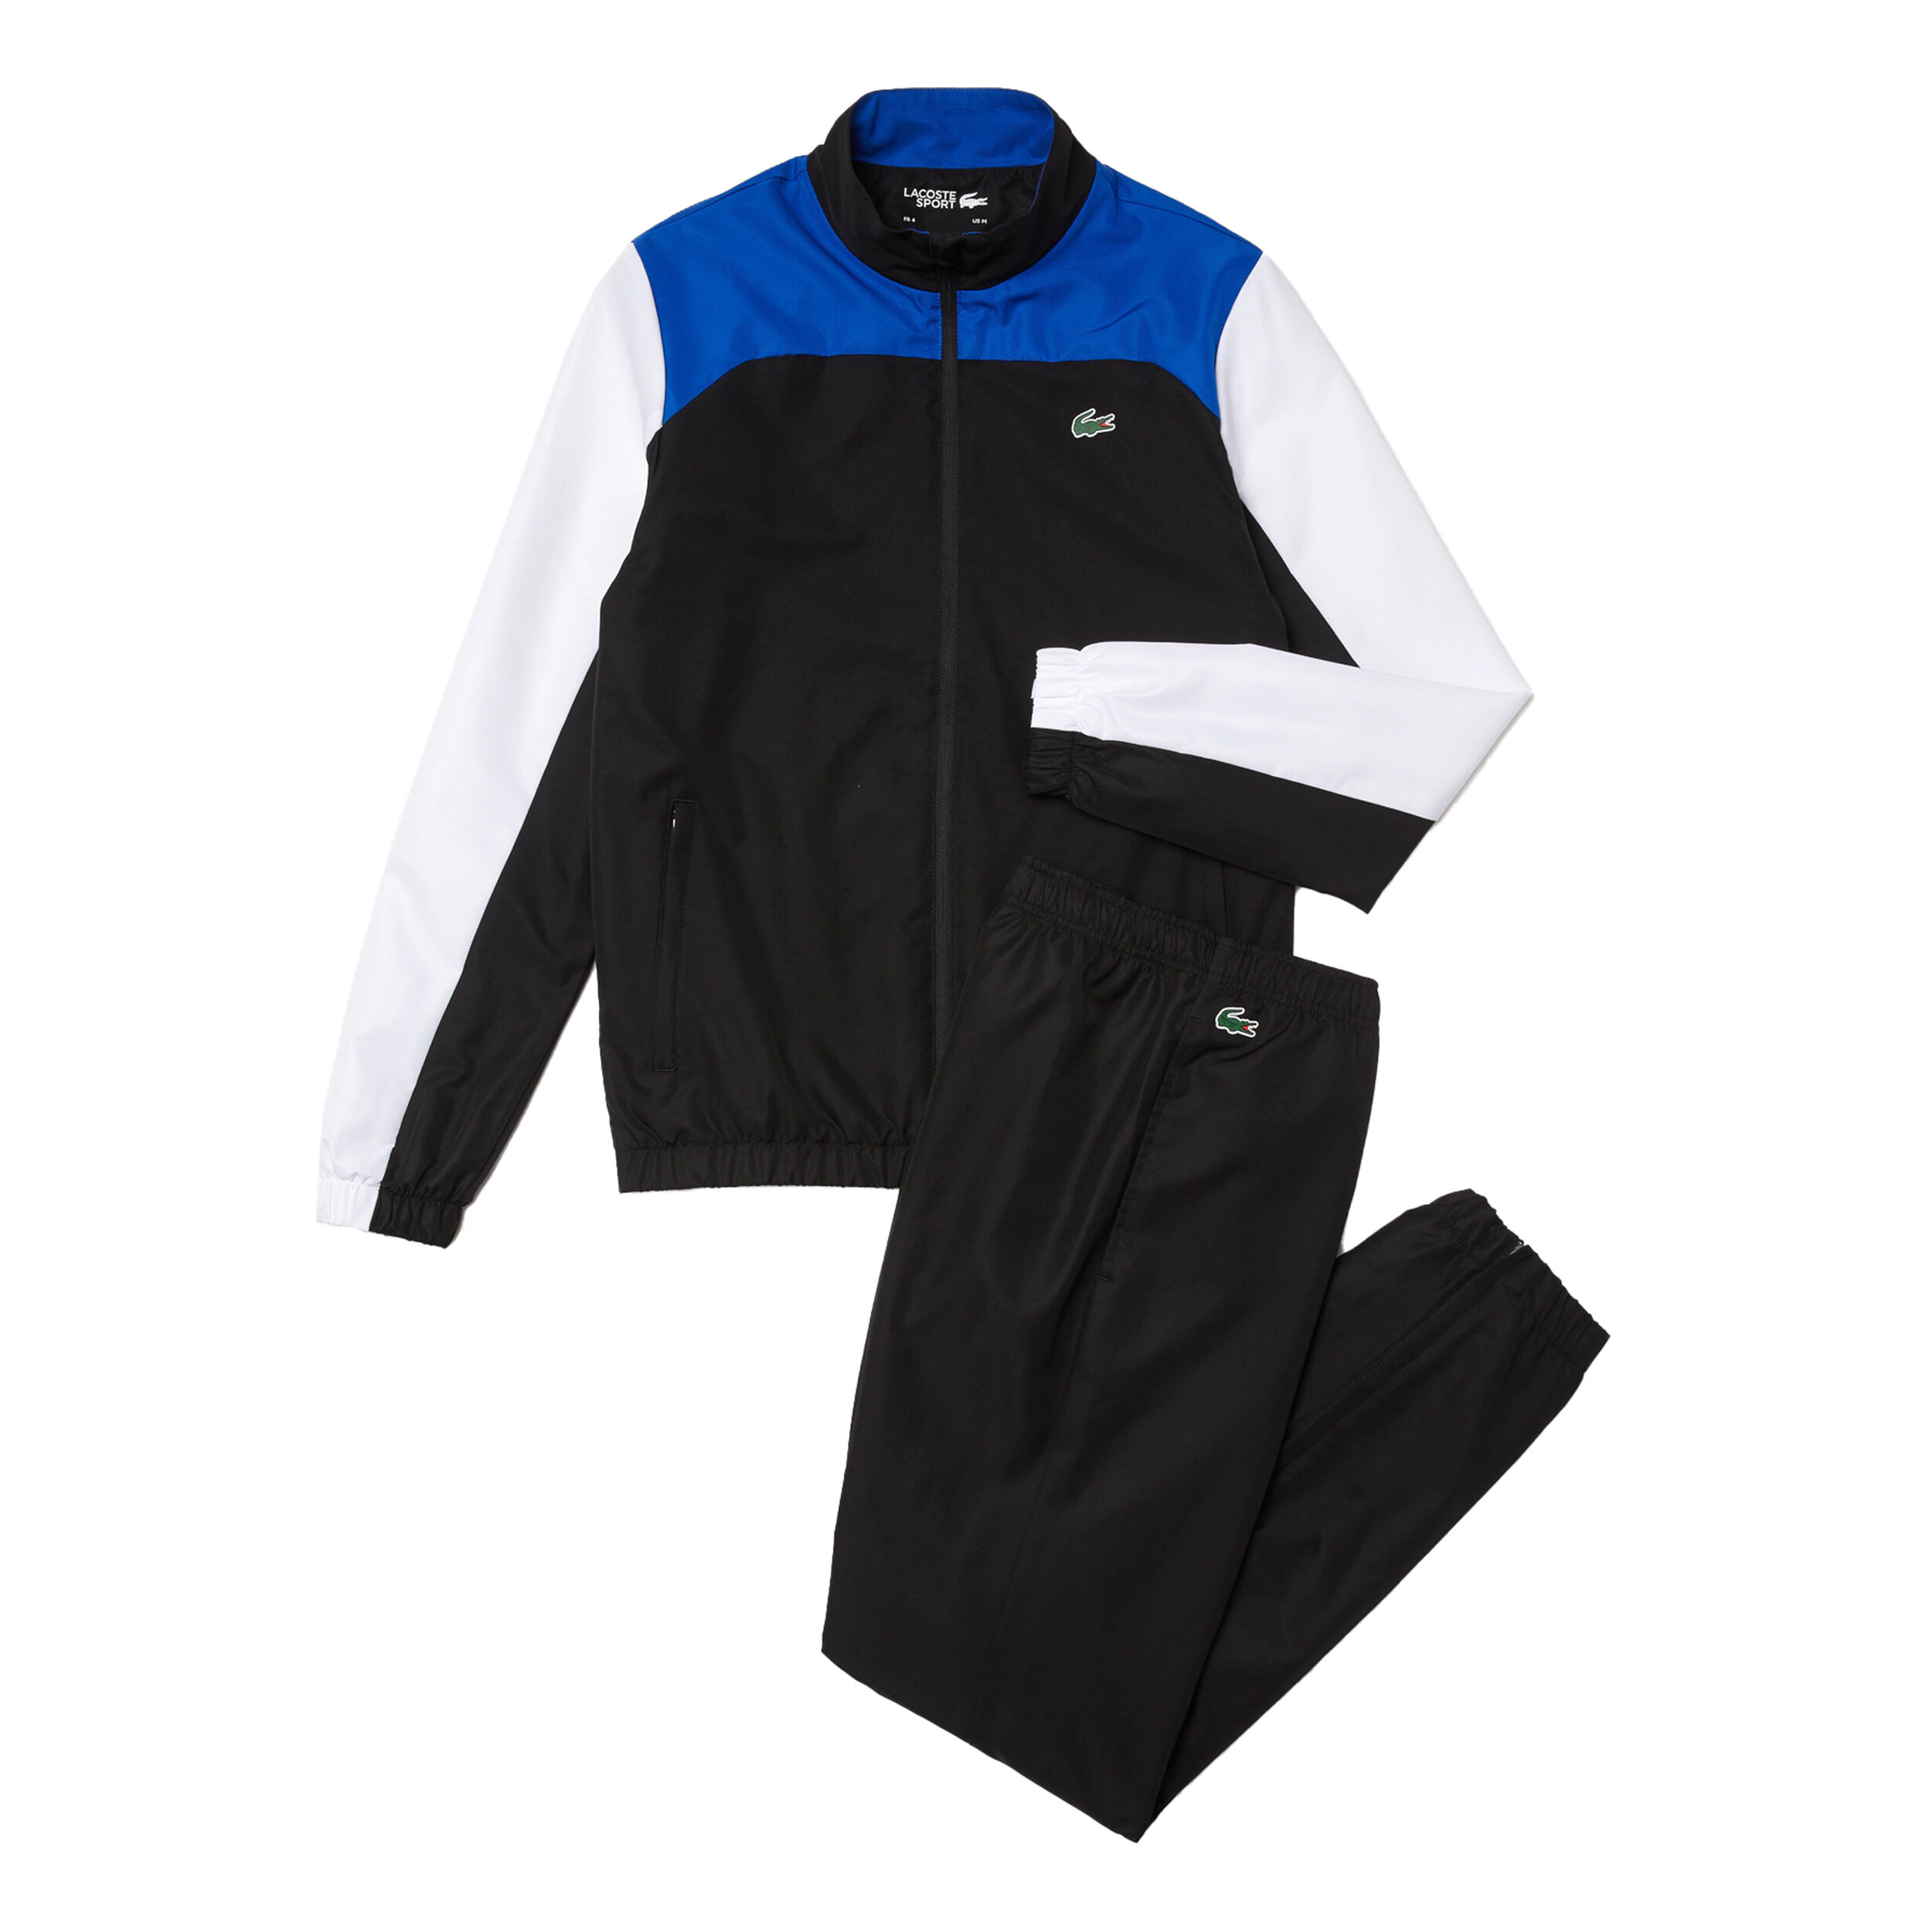 Lacoste Chándal Hombres - Negro, Azul compra online | Tennis-Point